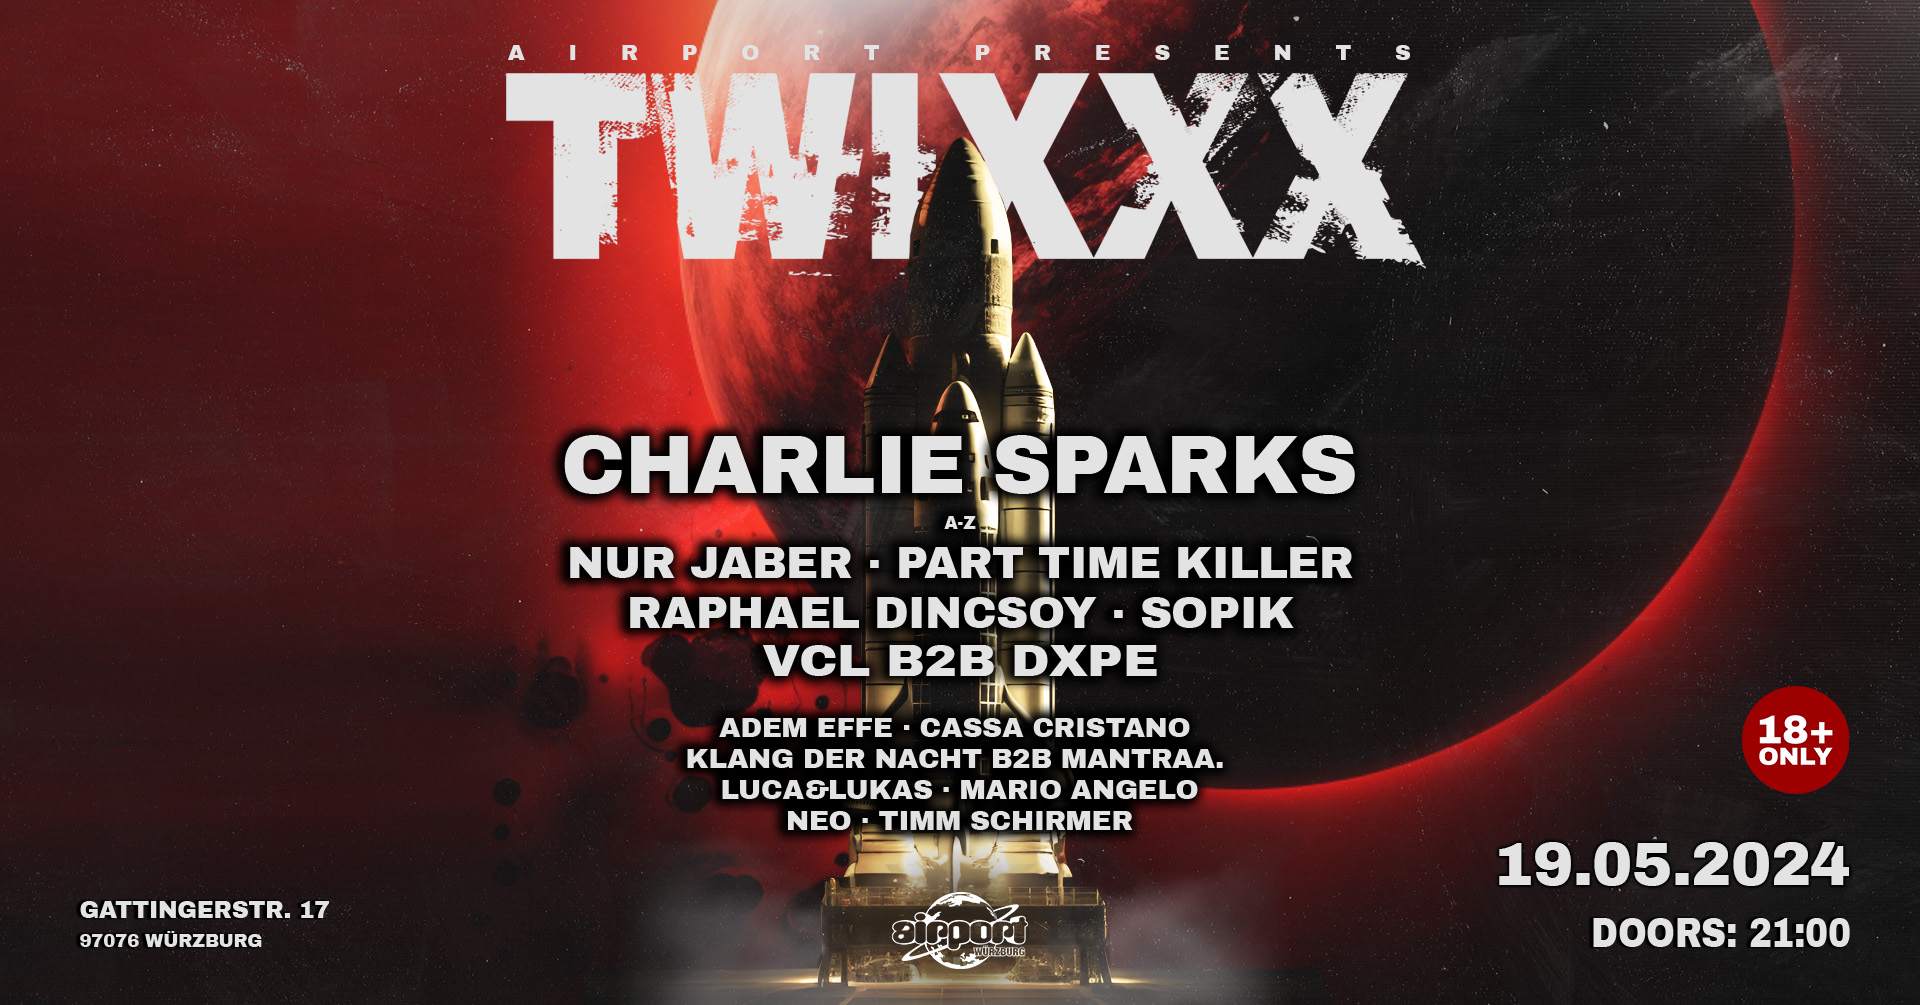 Airport pres TWIXXX w/ Charlie Sparks - フライヤー表